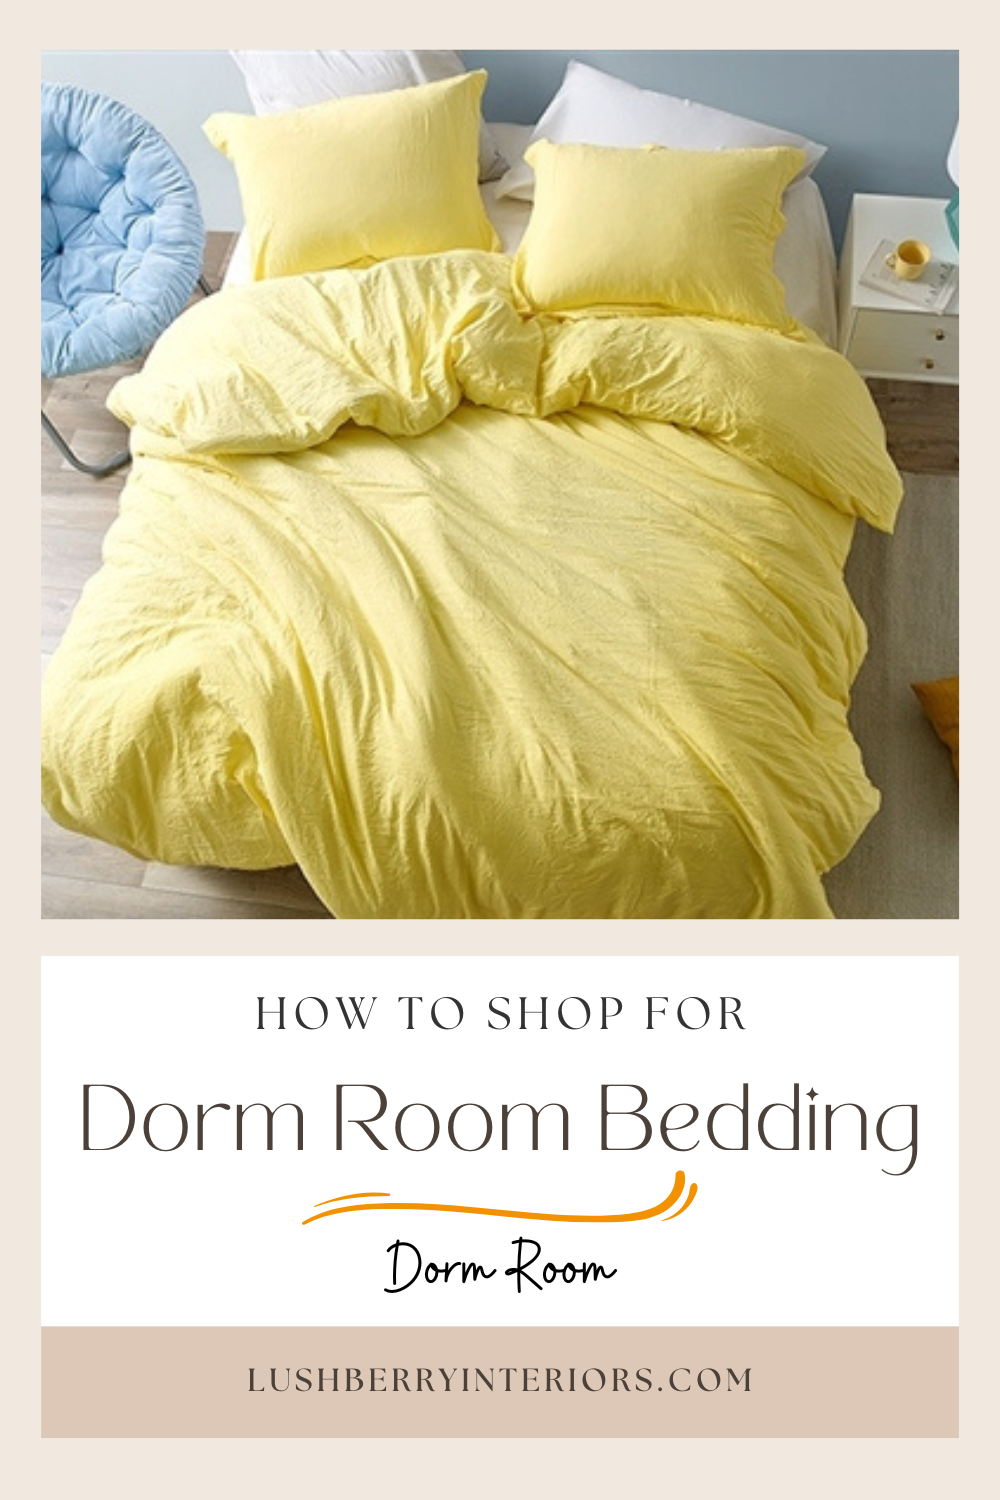 Dorm Room Bedding - How to Shop for College bedding